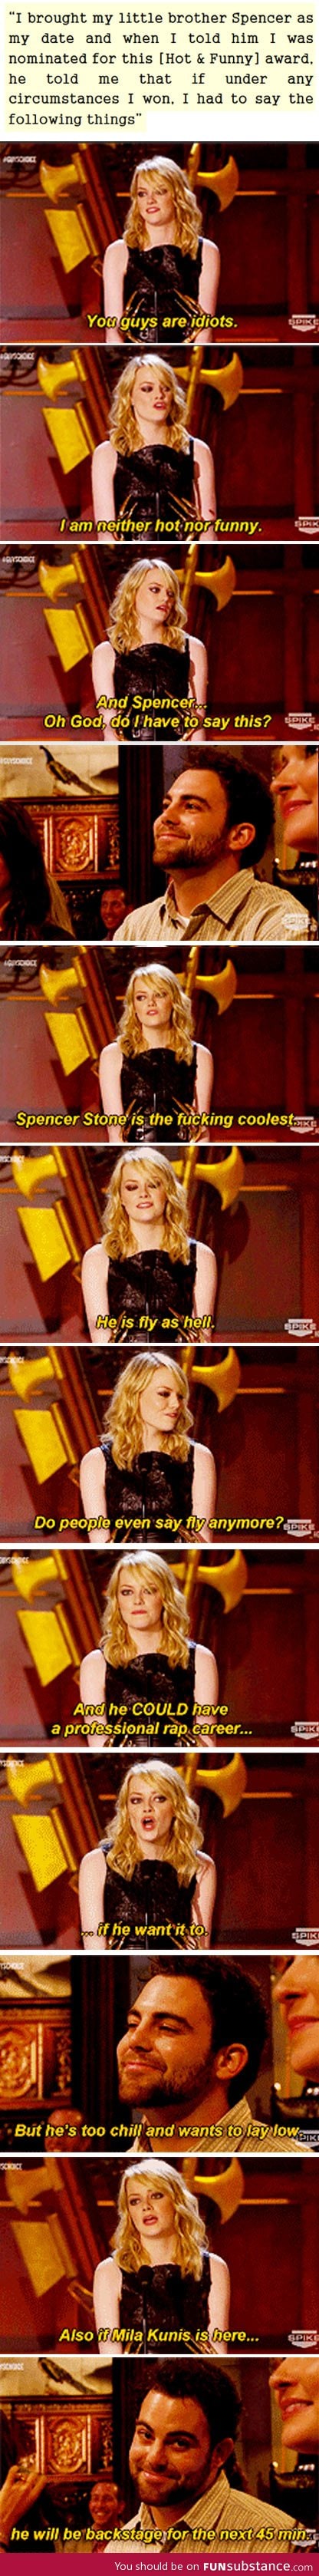 Emma Stone is the best sister ever